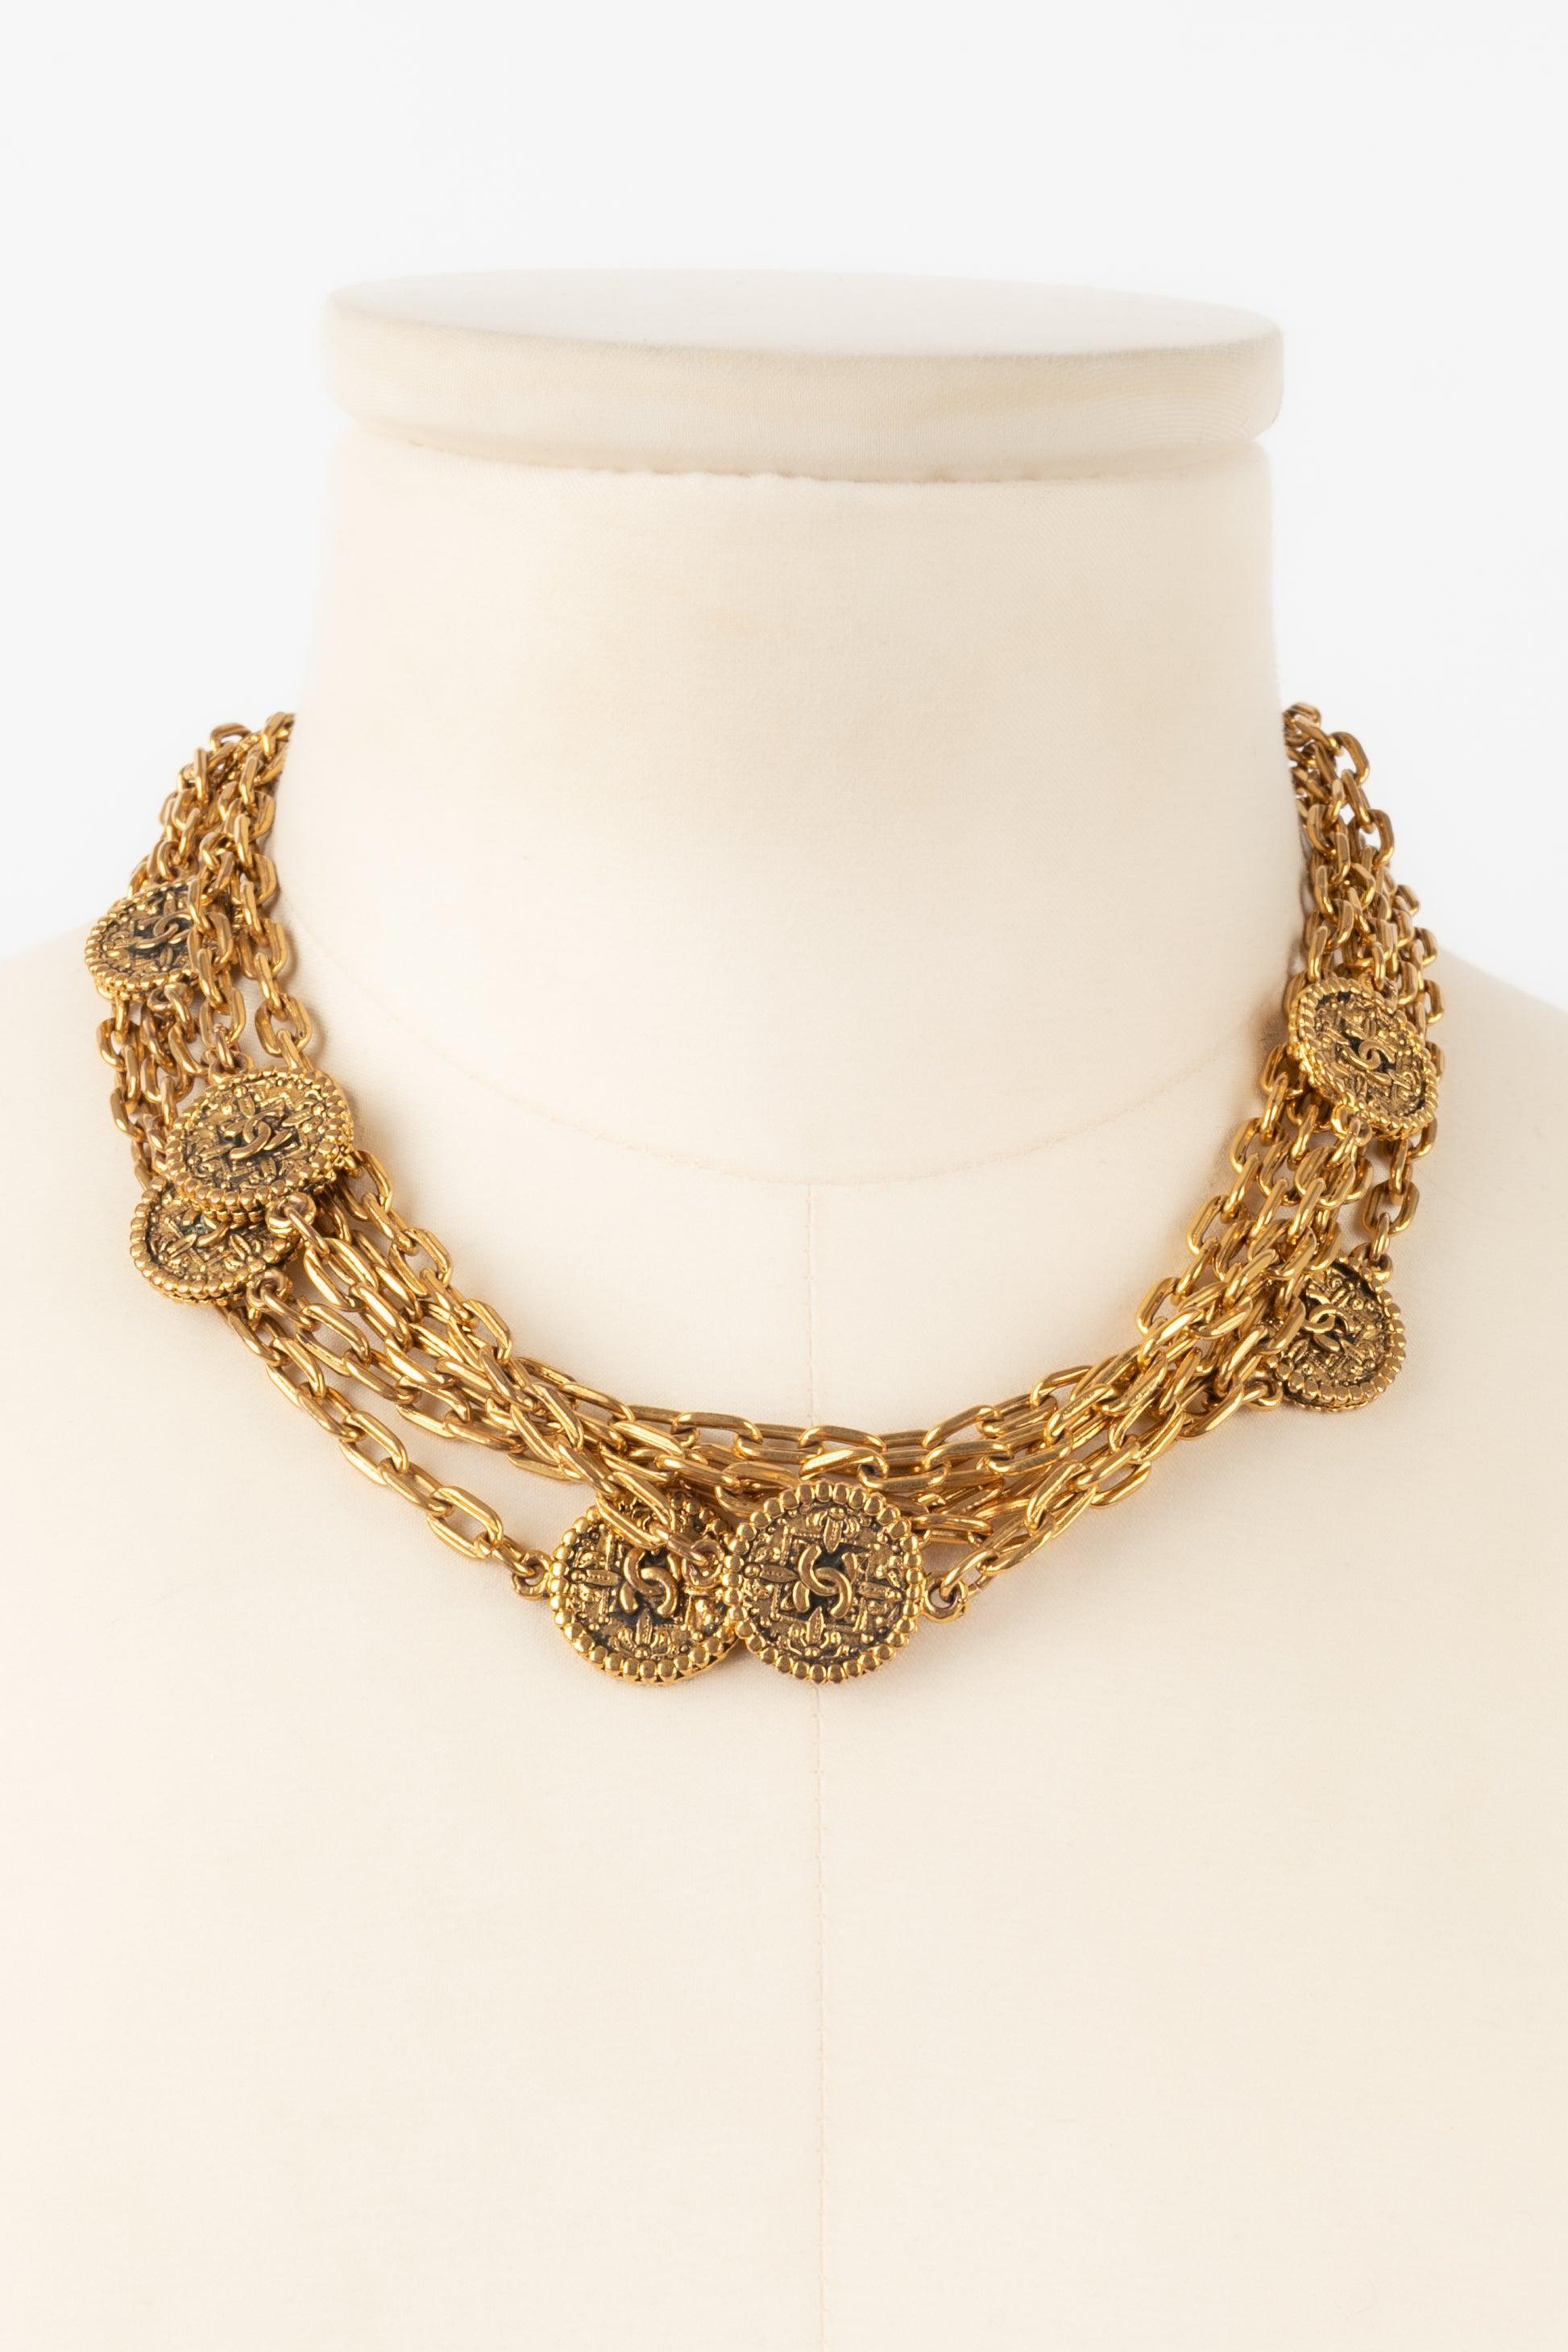 Women's Chanel Multi-row Short Necklace with Golden Metal Chains